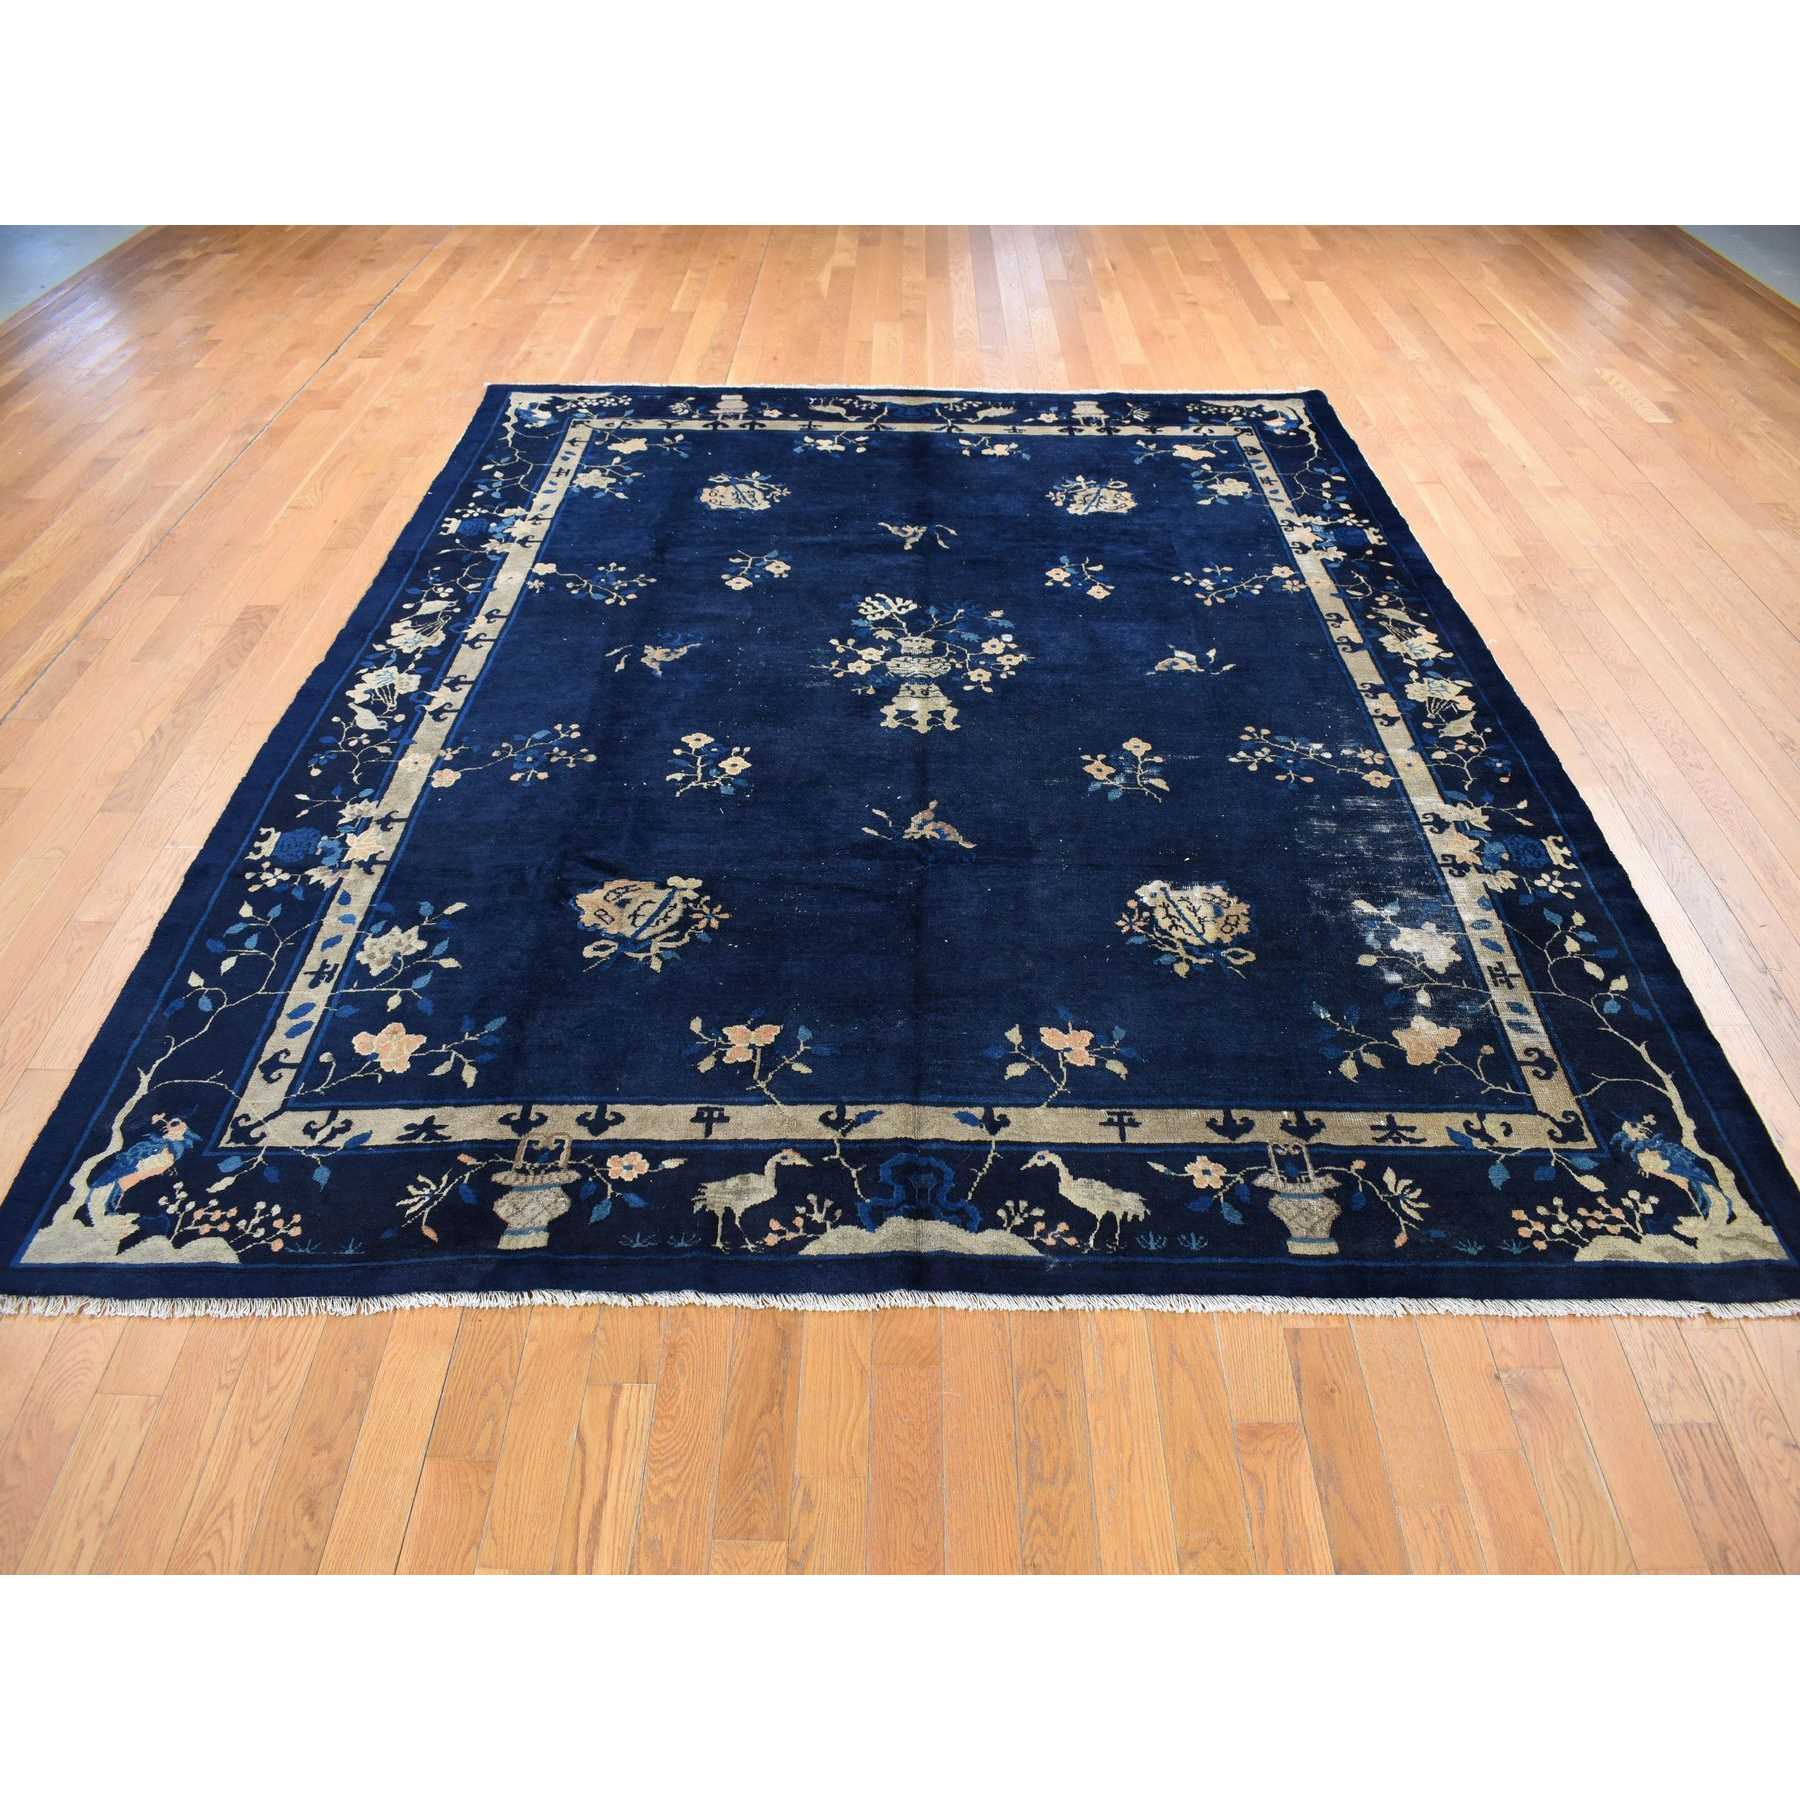 Antique-Hand-Knotted-Rug-403515